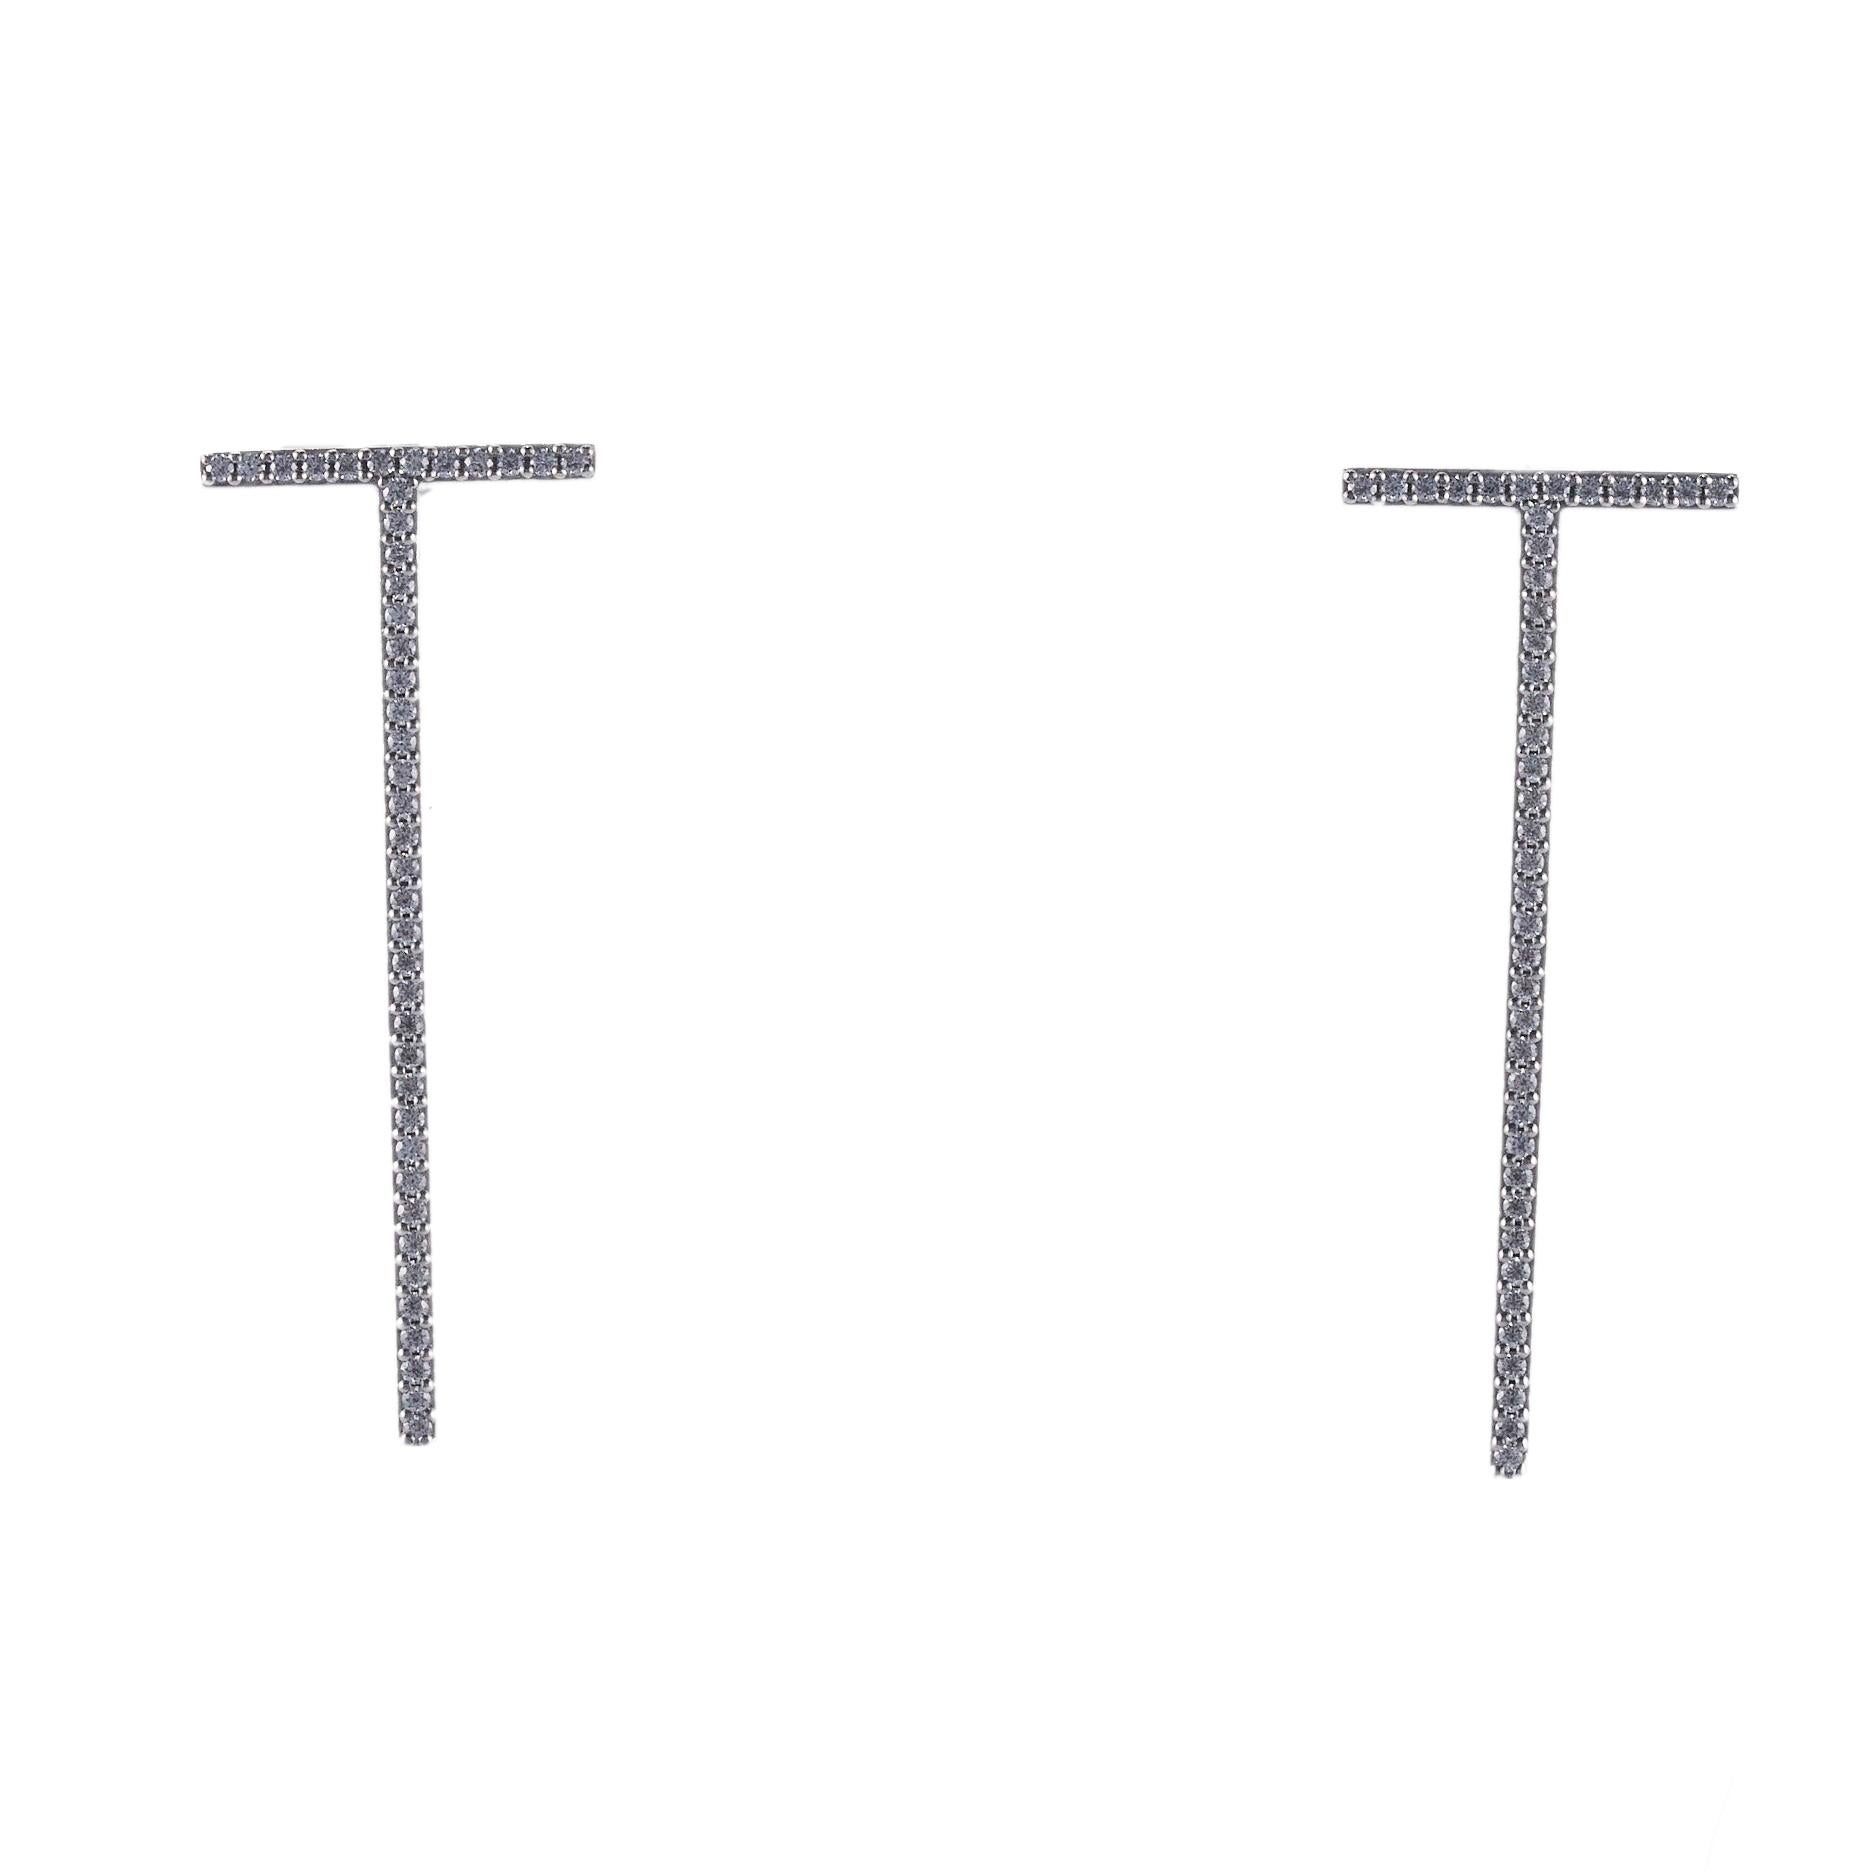 Tiffany & Co T collection earrings, set with approx. 0.46ctw in VS/G diamonds. Earrings measure 35mm x 14mm. Marked: T & Co, Au750. weight is 4.2 grams.